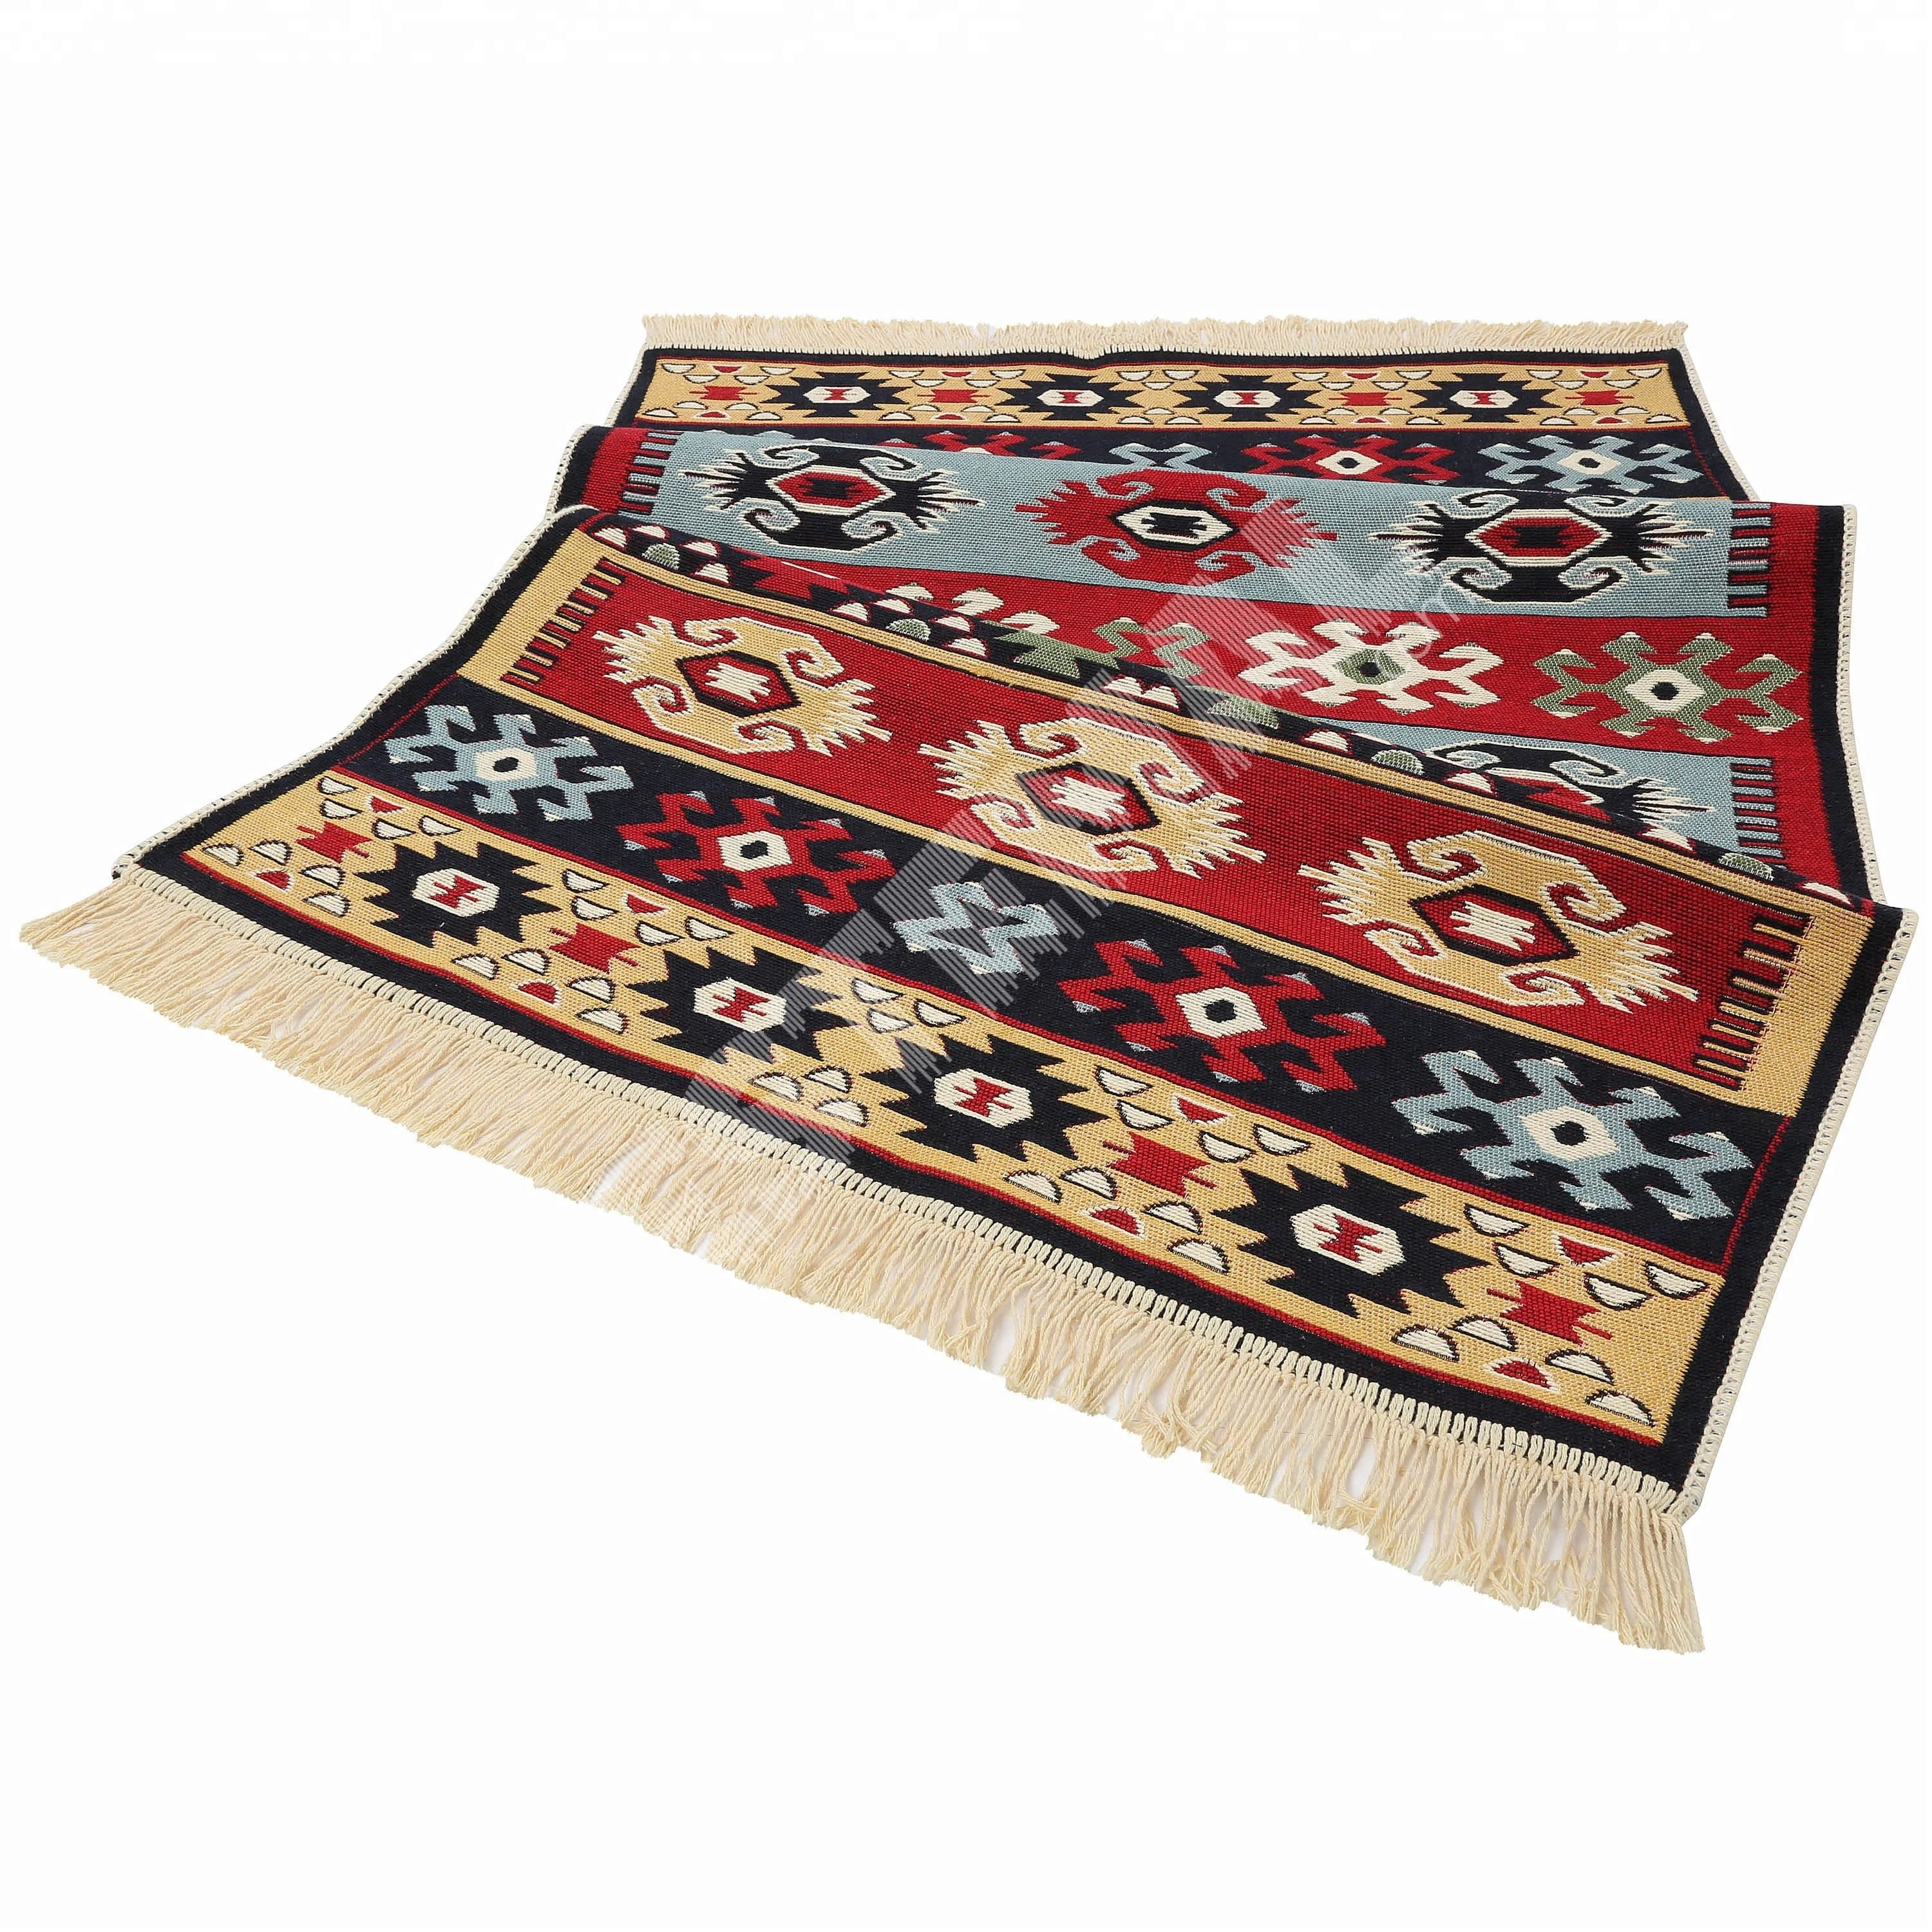 Authentic Turkish Symbols Jacquard on Rug and Carpet with Fast Shipping | Premium Quality Kilim with Discount Price %100 Cotton